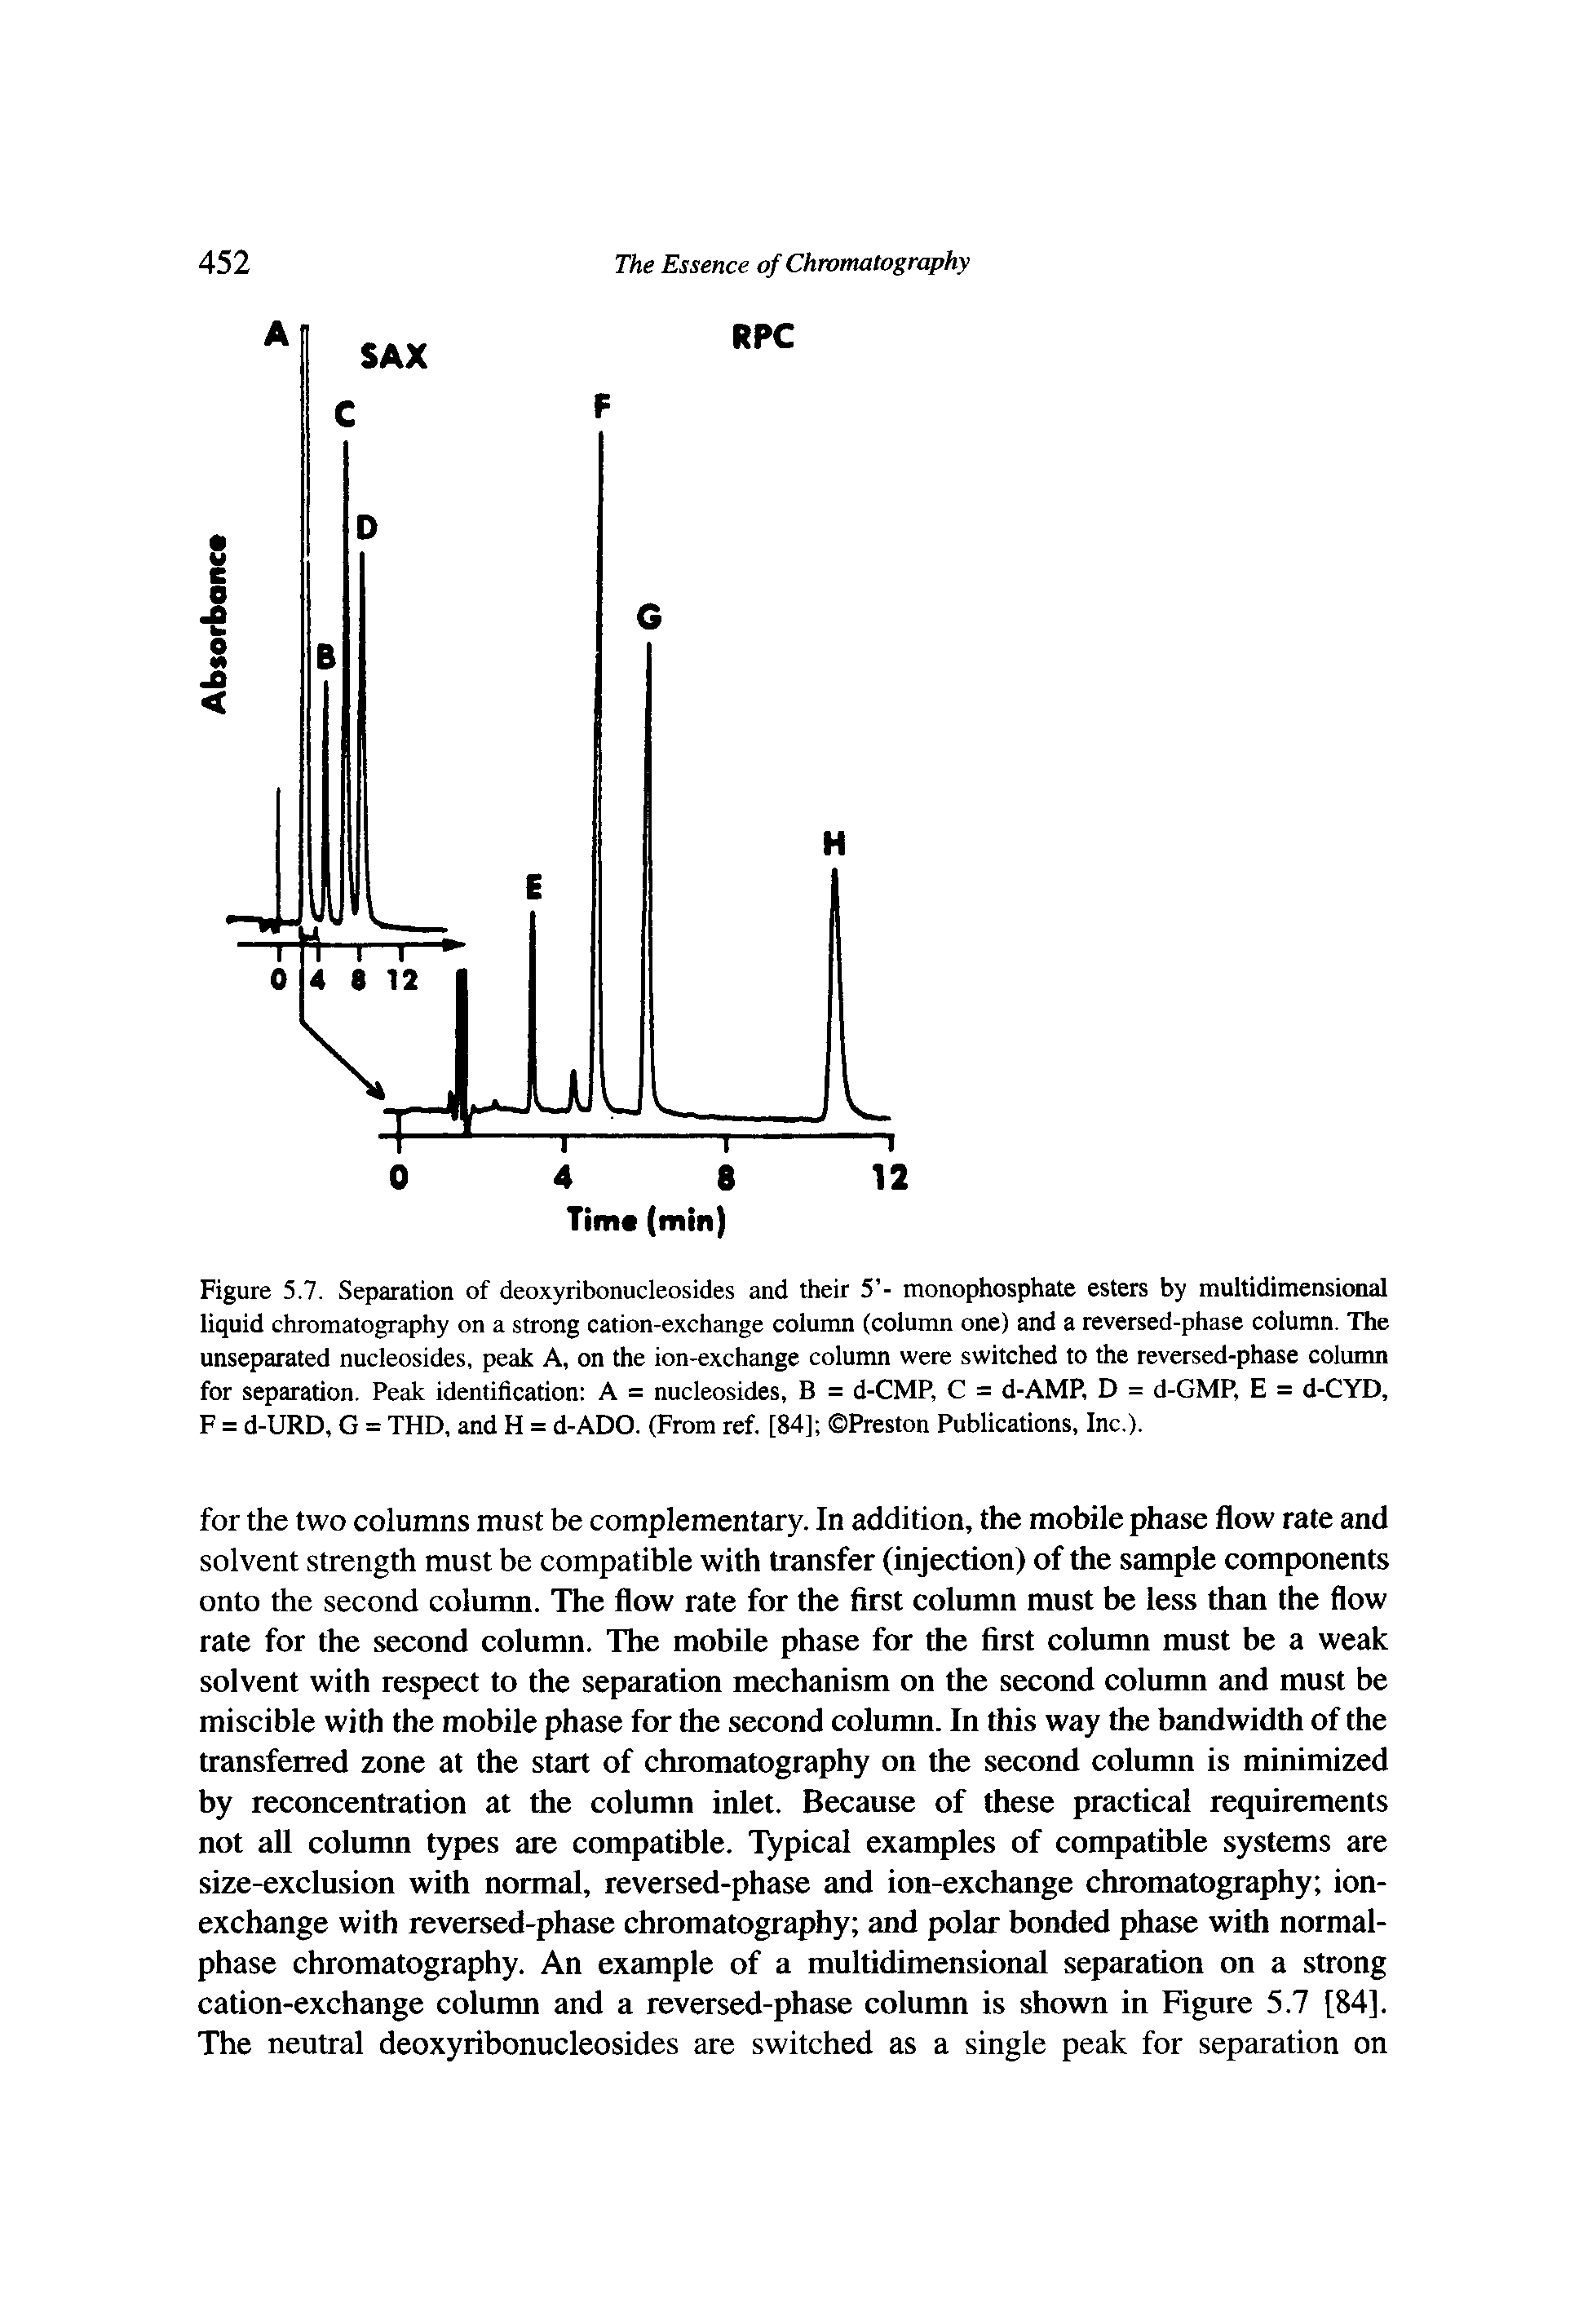 Figure 5.7. Separation of deoxyribonucleosides and their 5 - monophosphate esters by multidimensional liquid chromatography on a strong cation-exchange column (column one) and a reversed-phase column. The unseparated nucleosides, peak A, on the ion-exchange column were switched to the reversed-phase coluiim for separation. Peak identification A = nucleosides, B = d-CMP, C = d-AMP, D = d-GMP, E = d-CYD, F = d-URD, G = THD, and H = d-ADO. (From ref. [84] Preston Publications, Inc.).